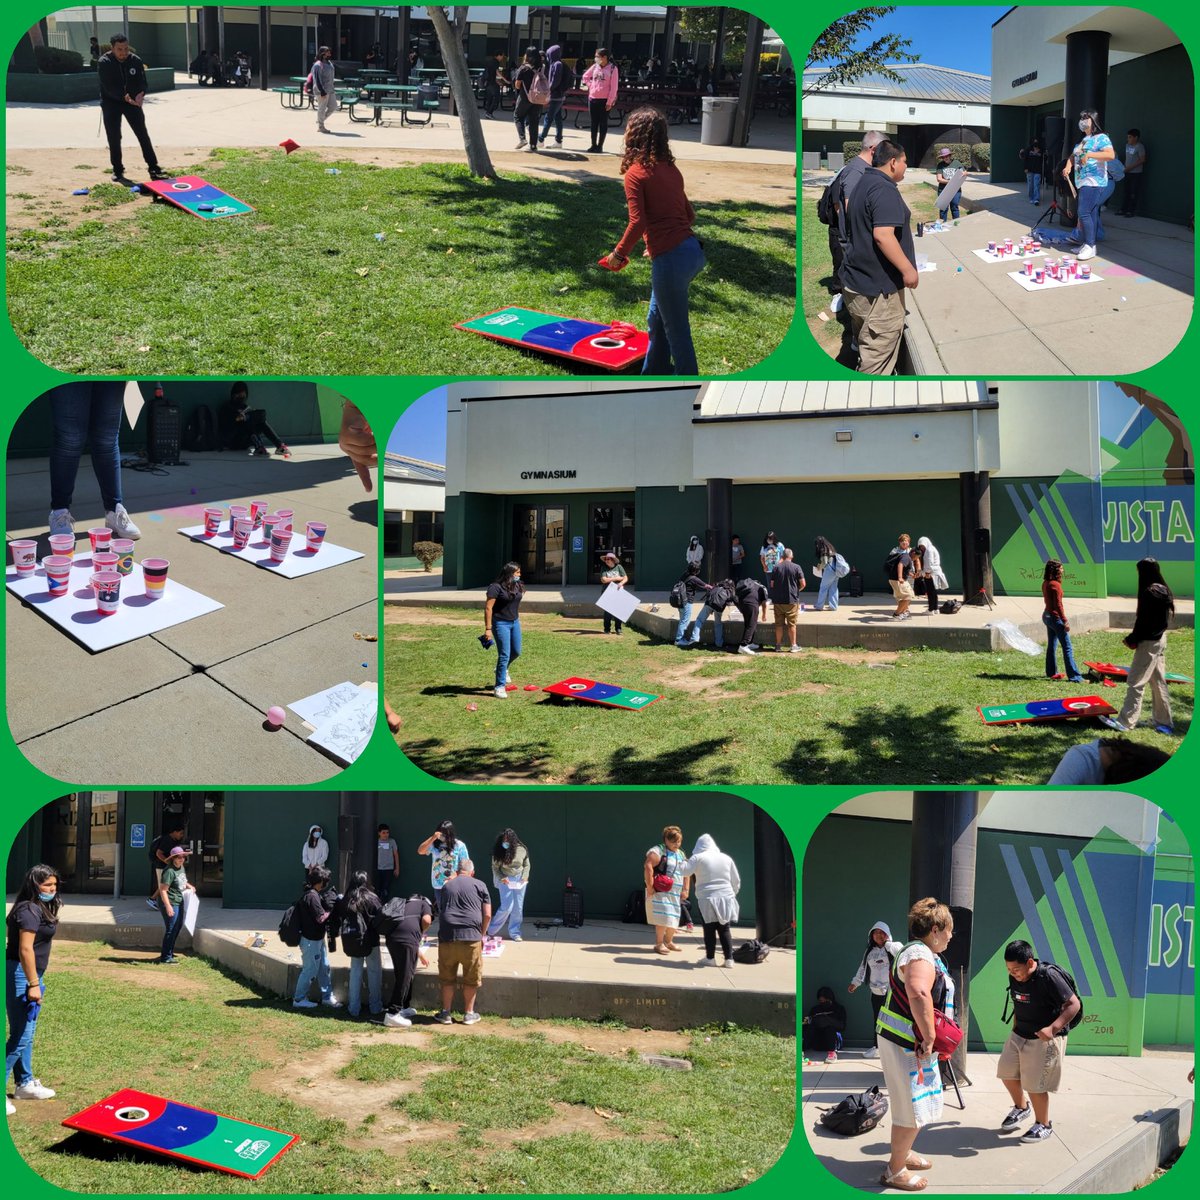 Enjoying our Friday Lunch Activities with our Grizzlies! 💚🐻Happy Friday Everyone 💚@VistaVerdeGrizz #PrideWeek #HeritagePrideDay #AllMeansAll @GrizzlyG0NZALEZ @DesantosVNorma @zjgalvan @GUSDEdServices @B_DominguezVVMS @LCortezGUSD @GUSDFACE 💚🐻